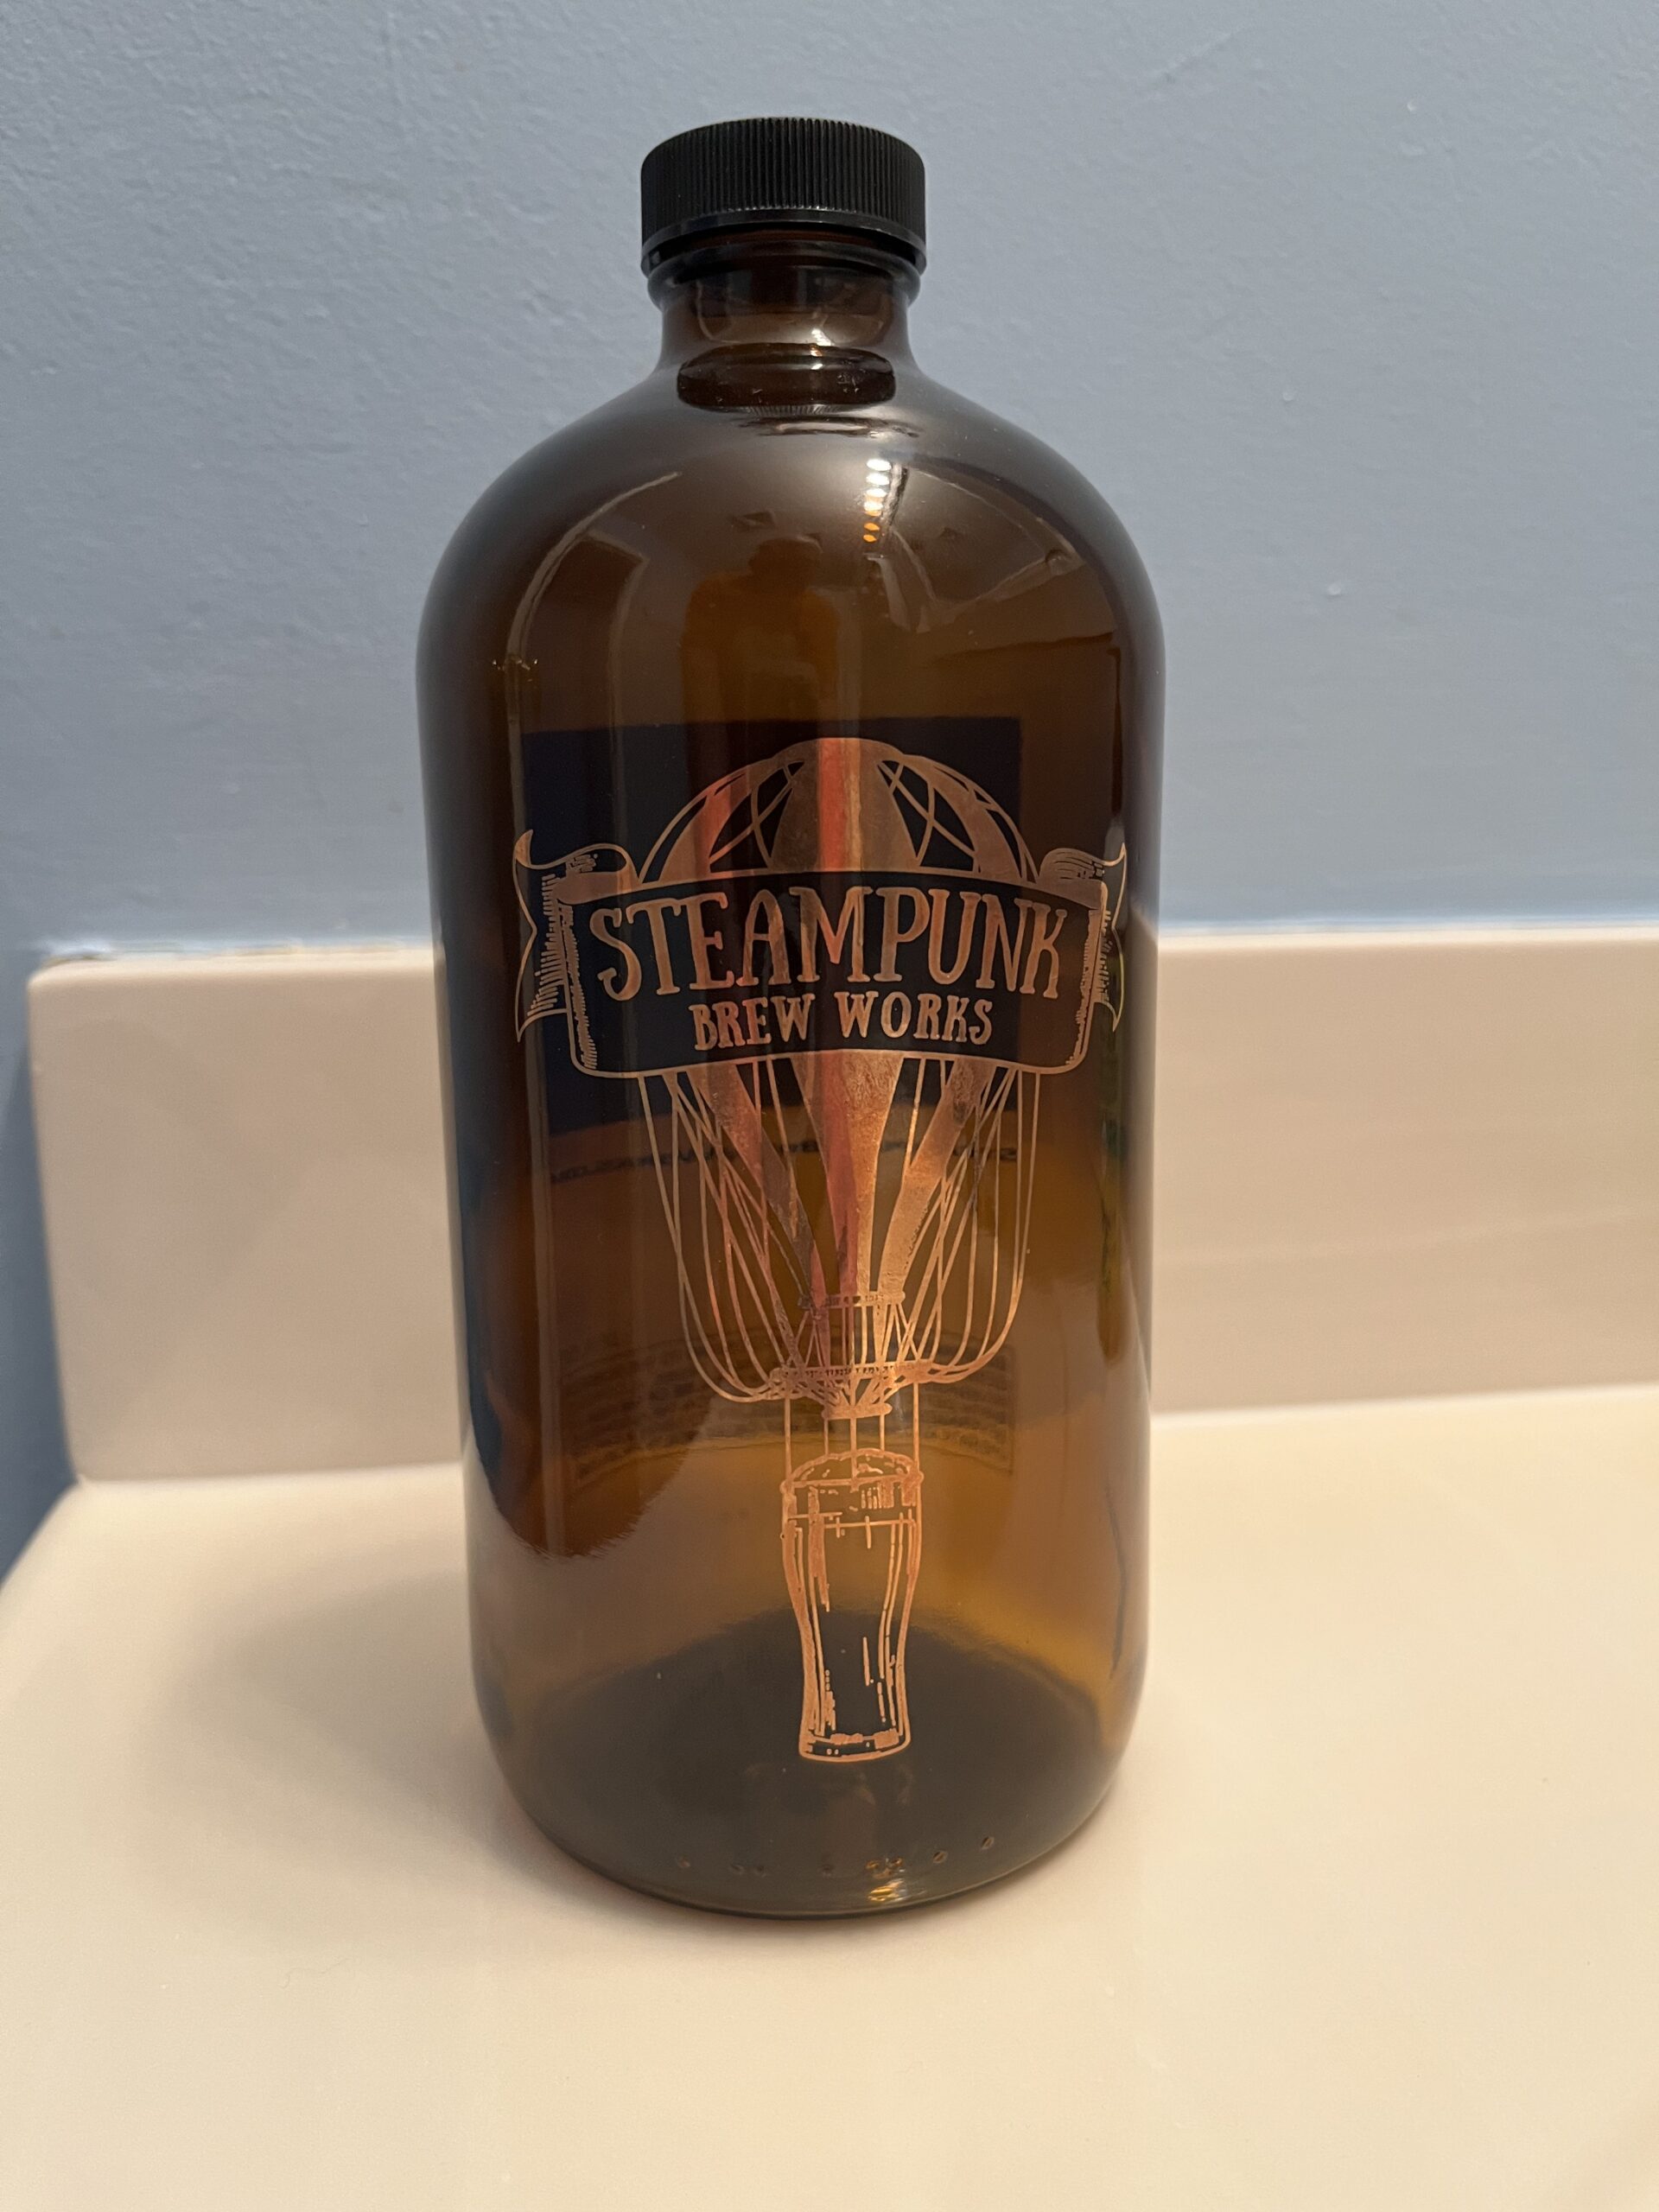 Item FW 3 - One glass, 32 oz Growler bottle ready to fill with Free Beer from Steampunk Brew Works valued at $15